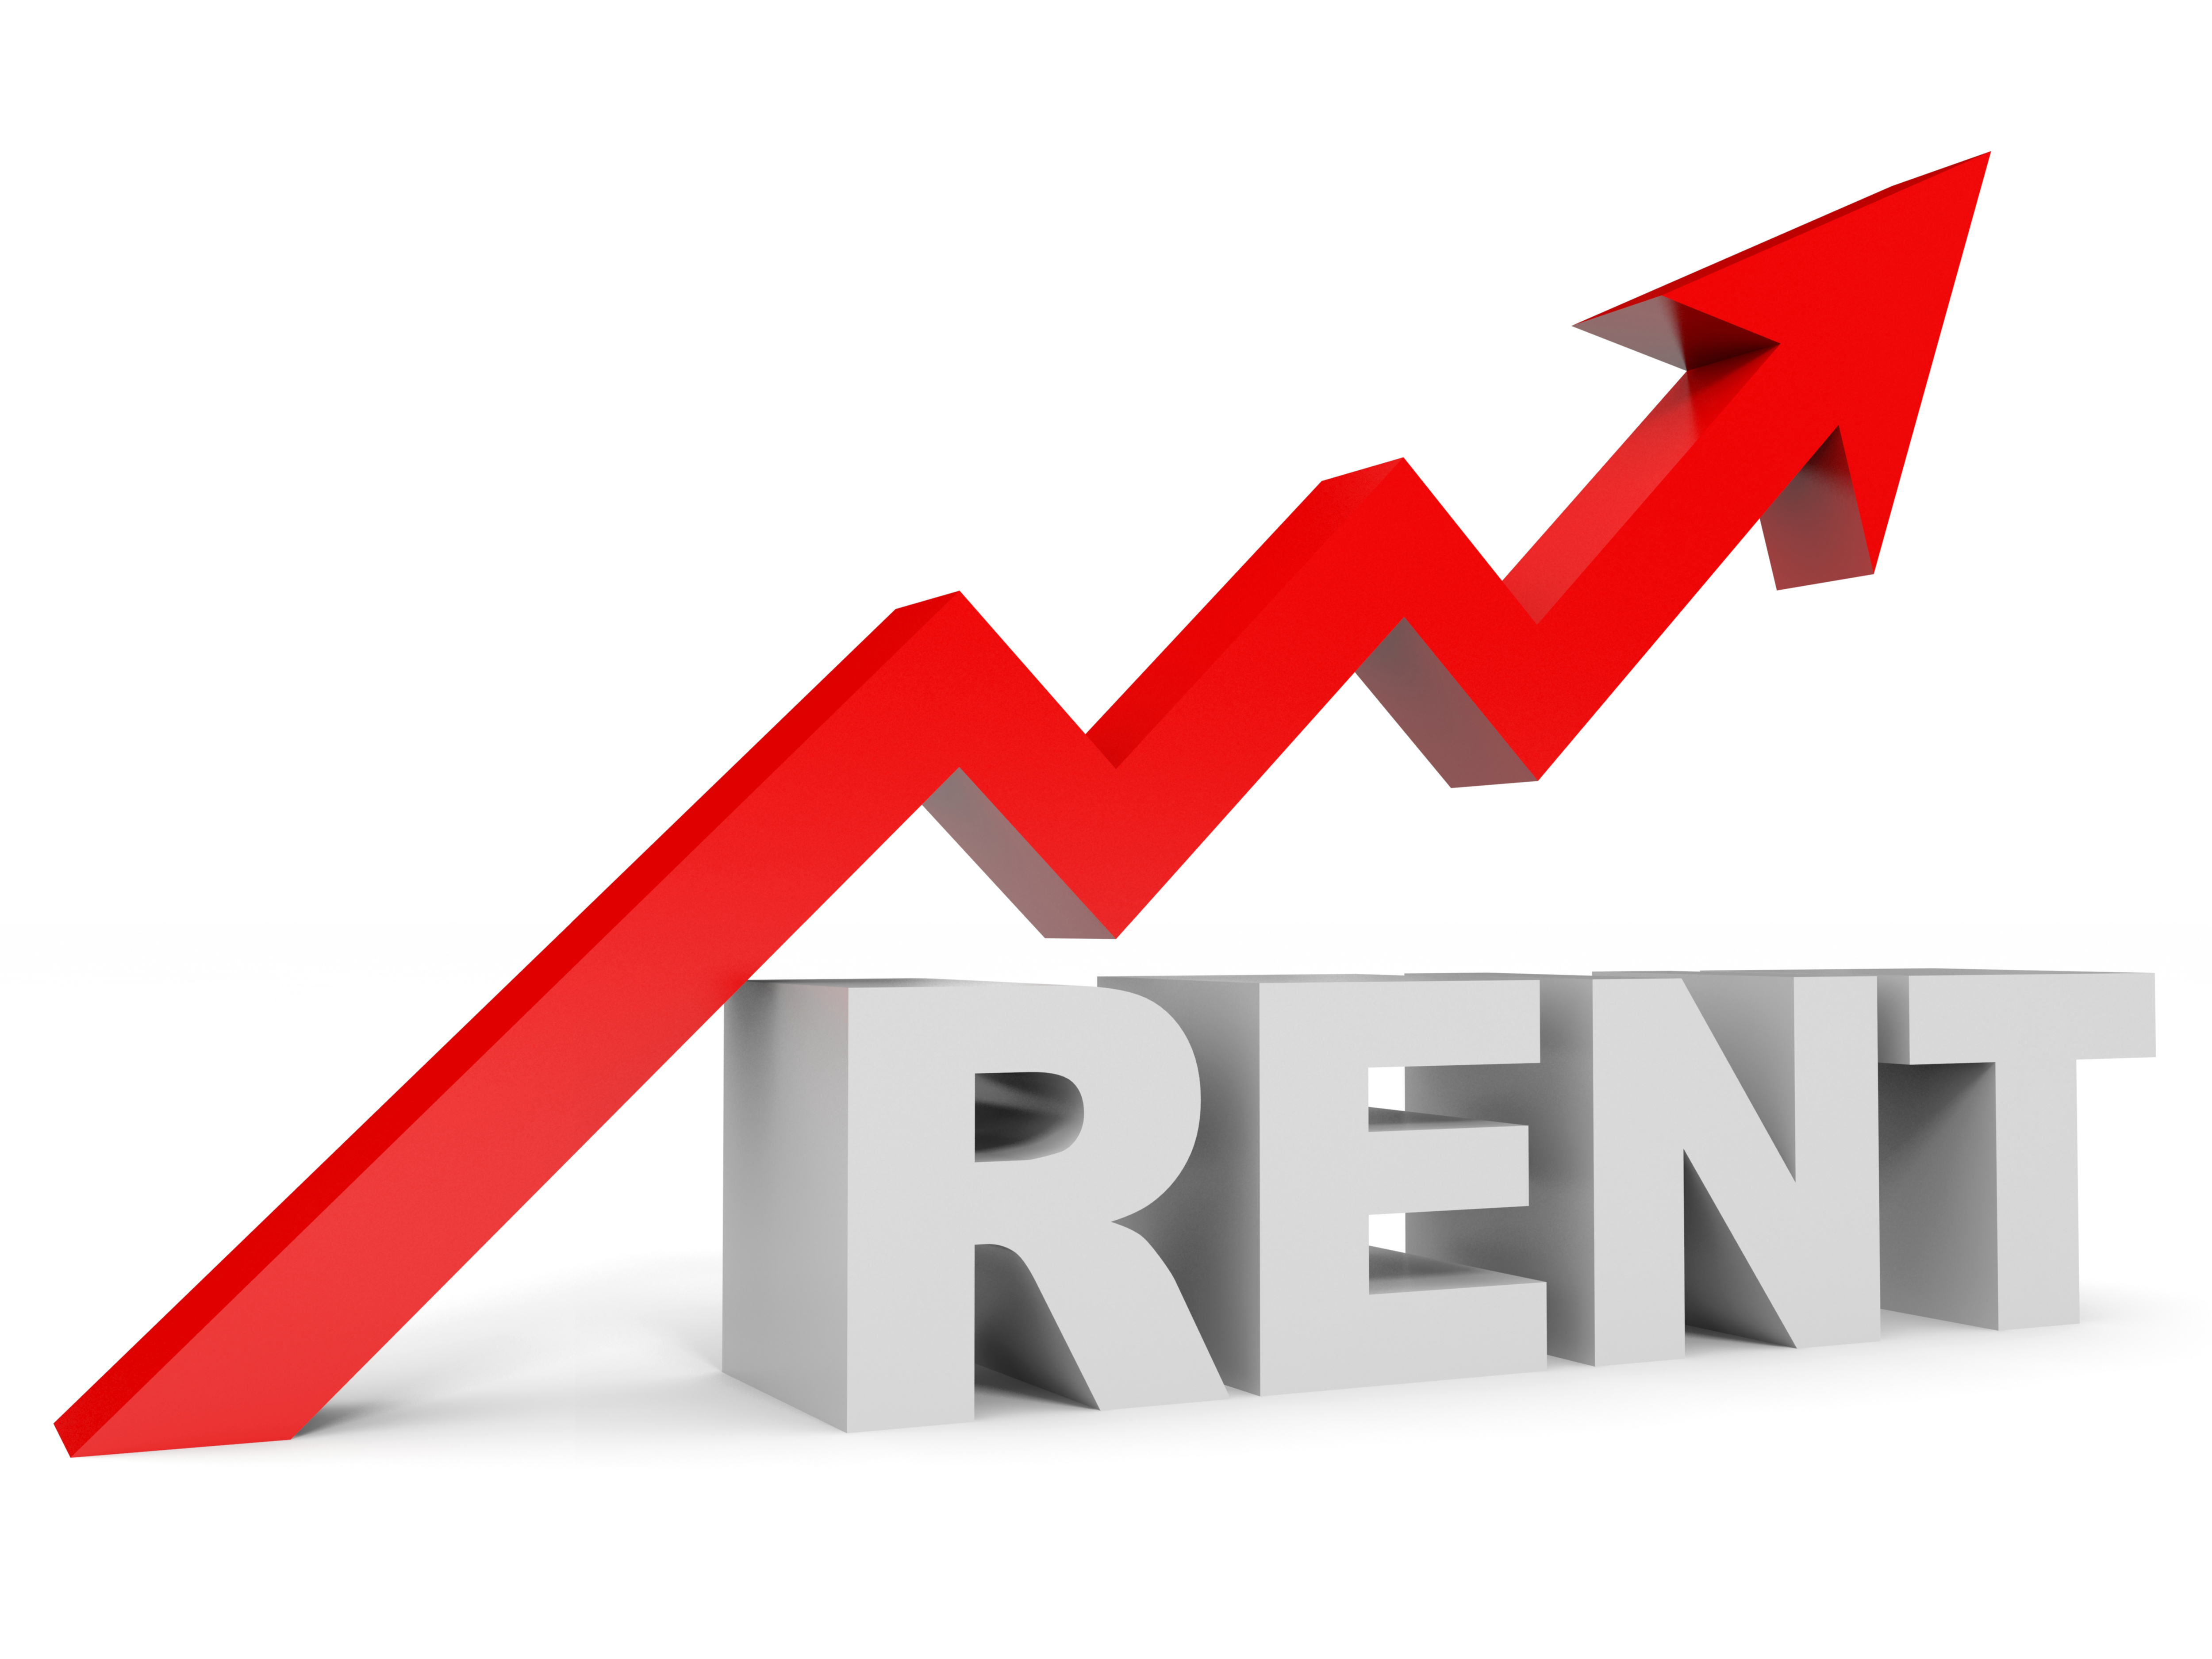 What's New In The News? Rents on the Rise!